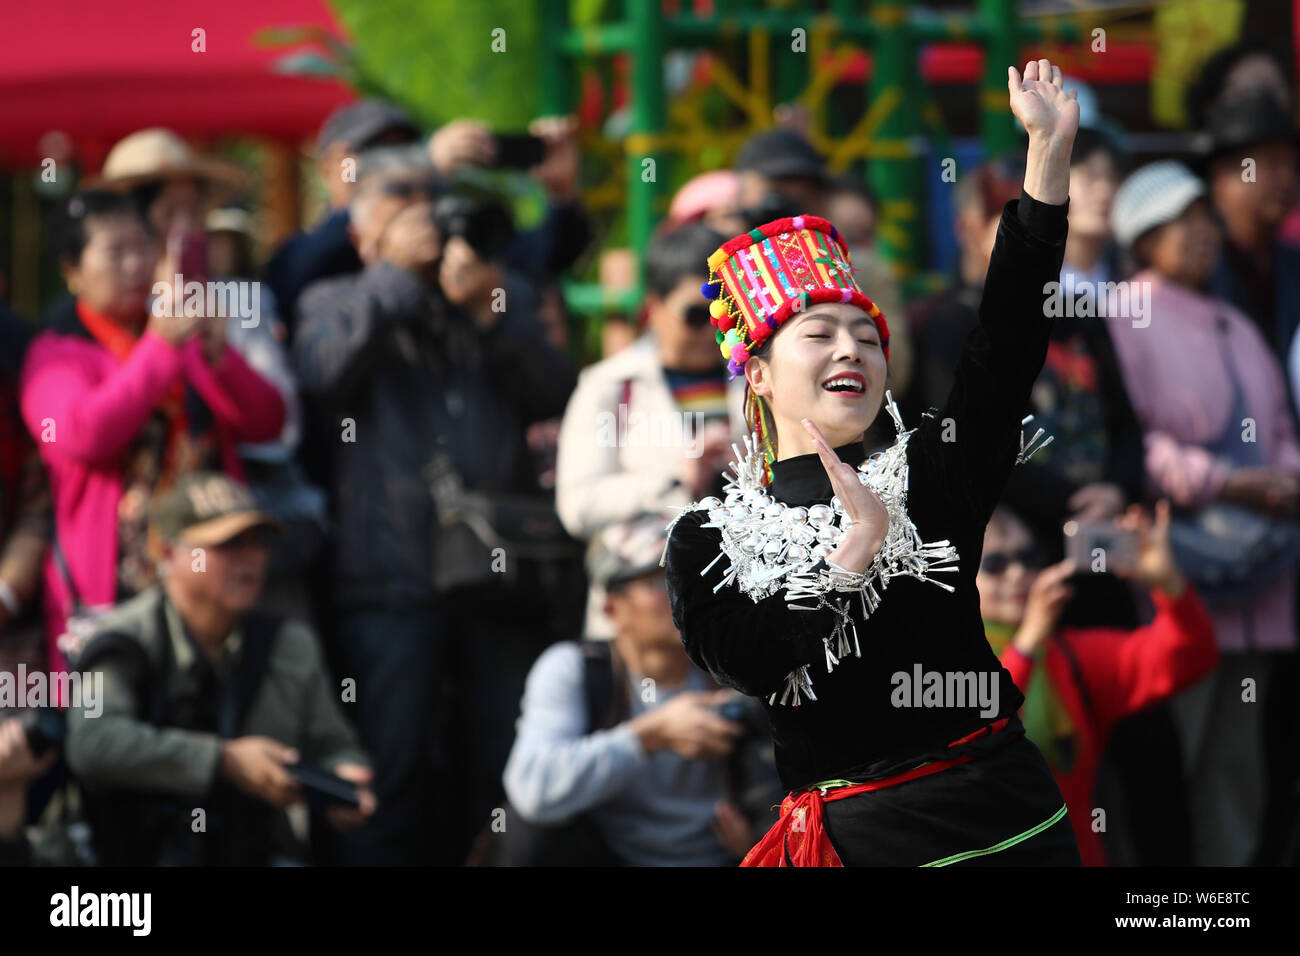 Chinese people of Jingpo ethnic group wearing traditional costumes and headwears take part in the Munao Zongge Festival at the Yunnan Ethnic Village t Stock Photo